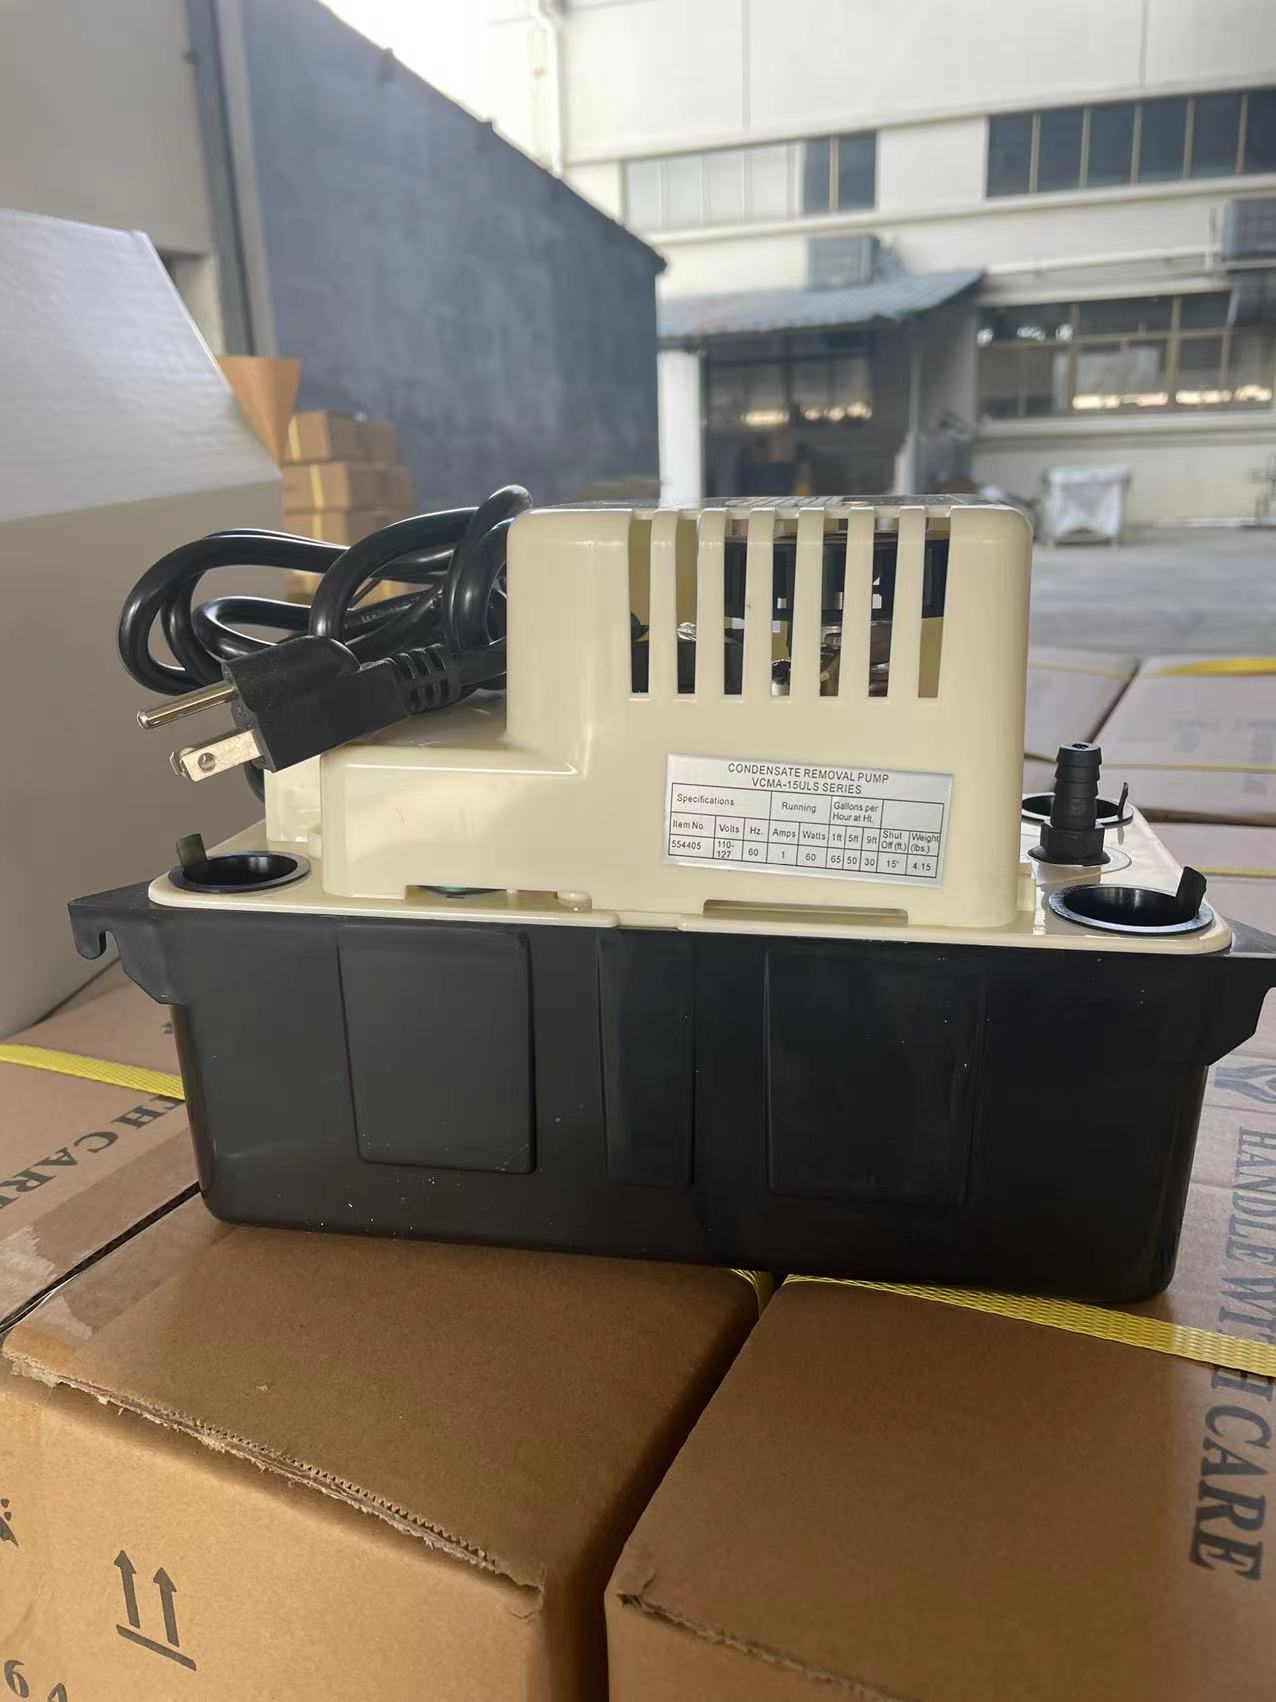 Shipment: Condensate removal pump to UK